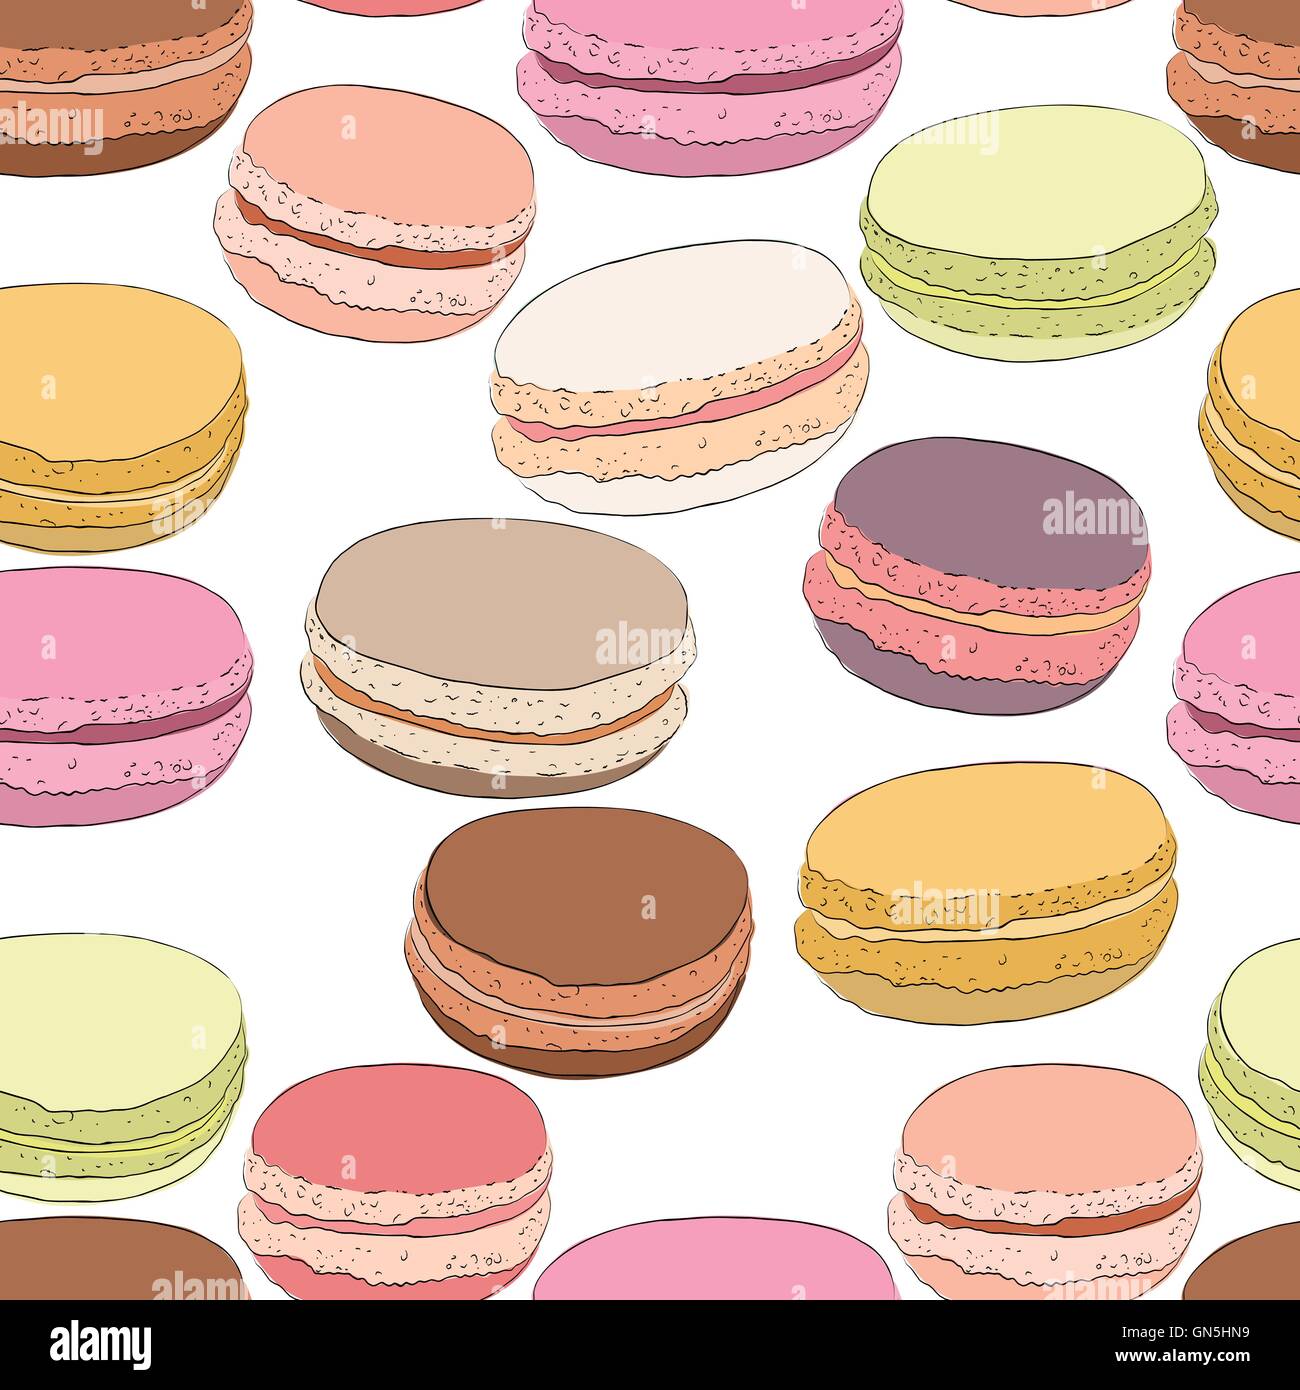 Seamless pattern of colorful doodle macaroons. Sketch macaroon. Stock Vector